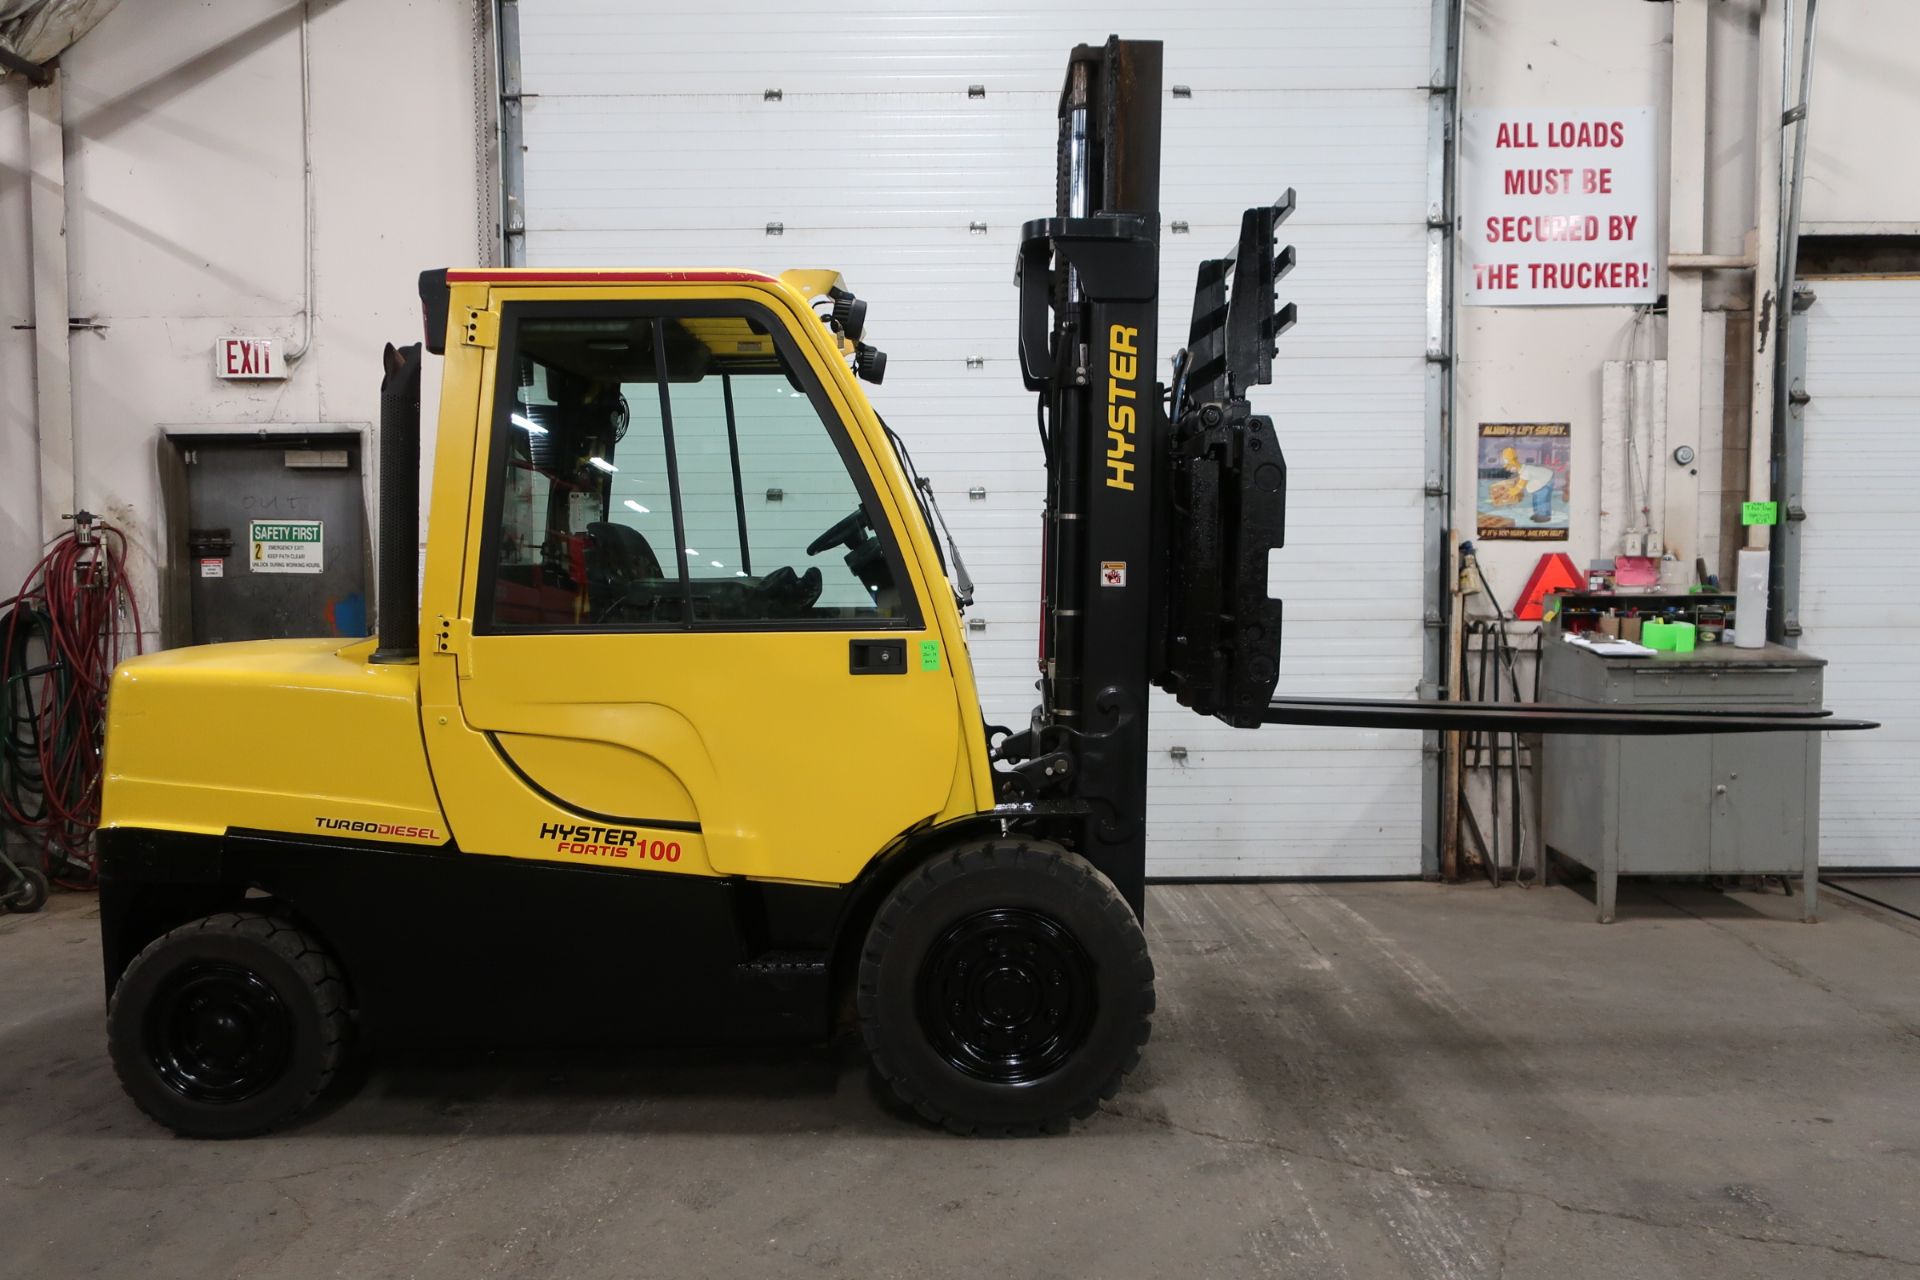 FREE CUSTOMS - 2014 Hyster 10000lbs Capacity OUTDOOR Forklift with 72" forks and fork positioners